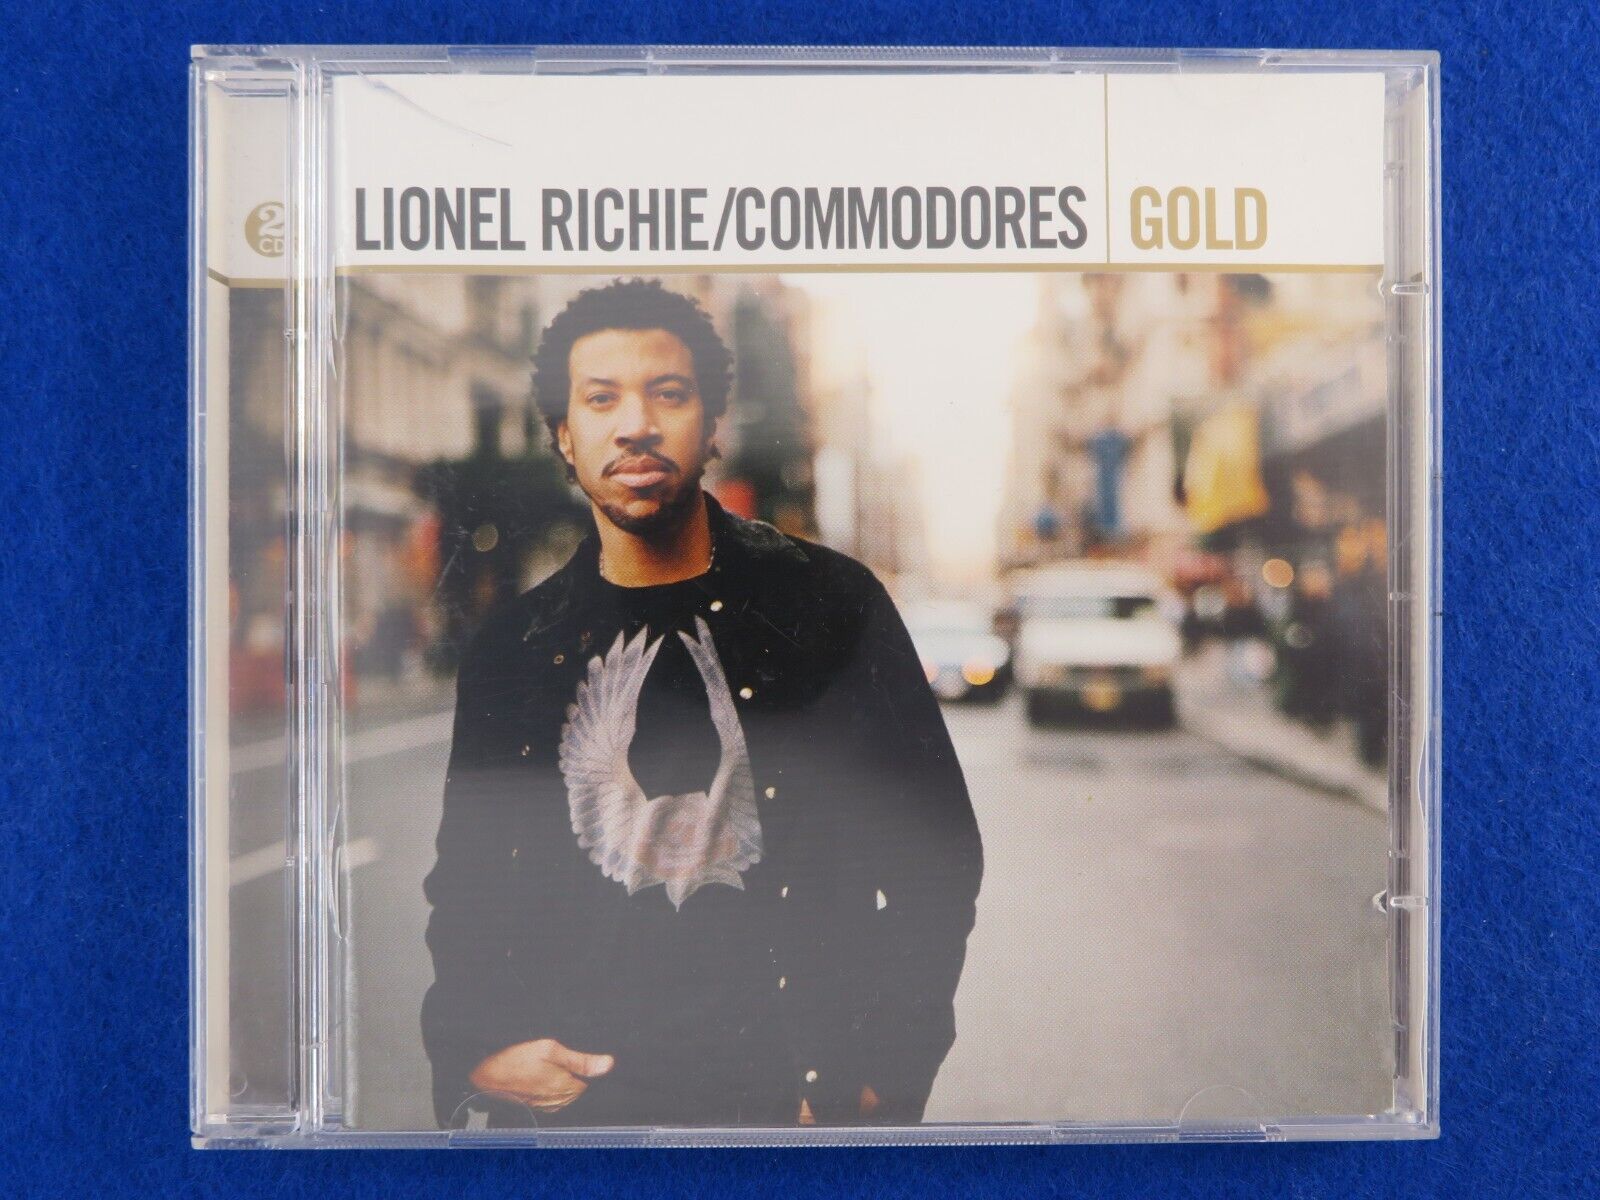 Lionel Richie/Commodores Gold - CD - Fast Postage 